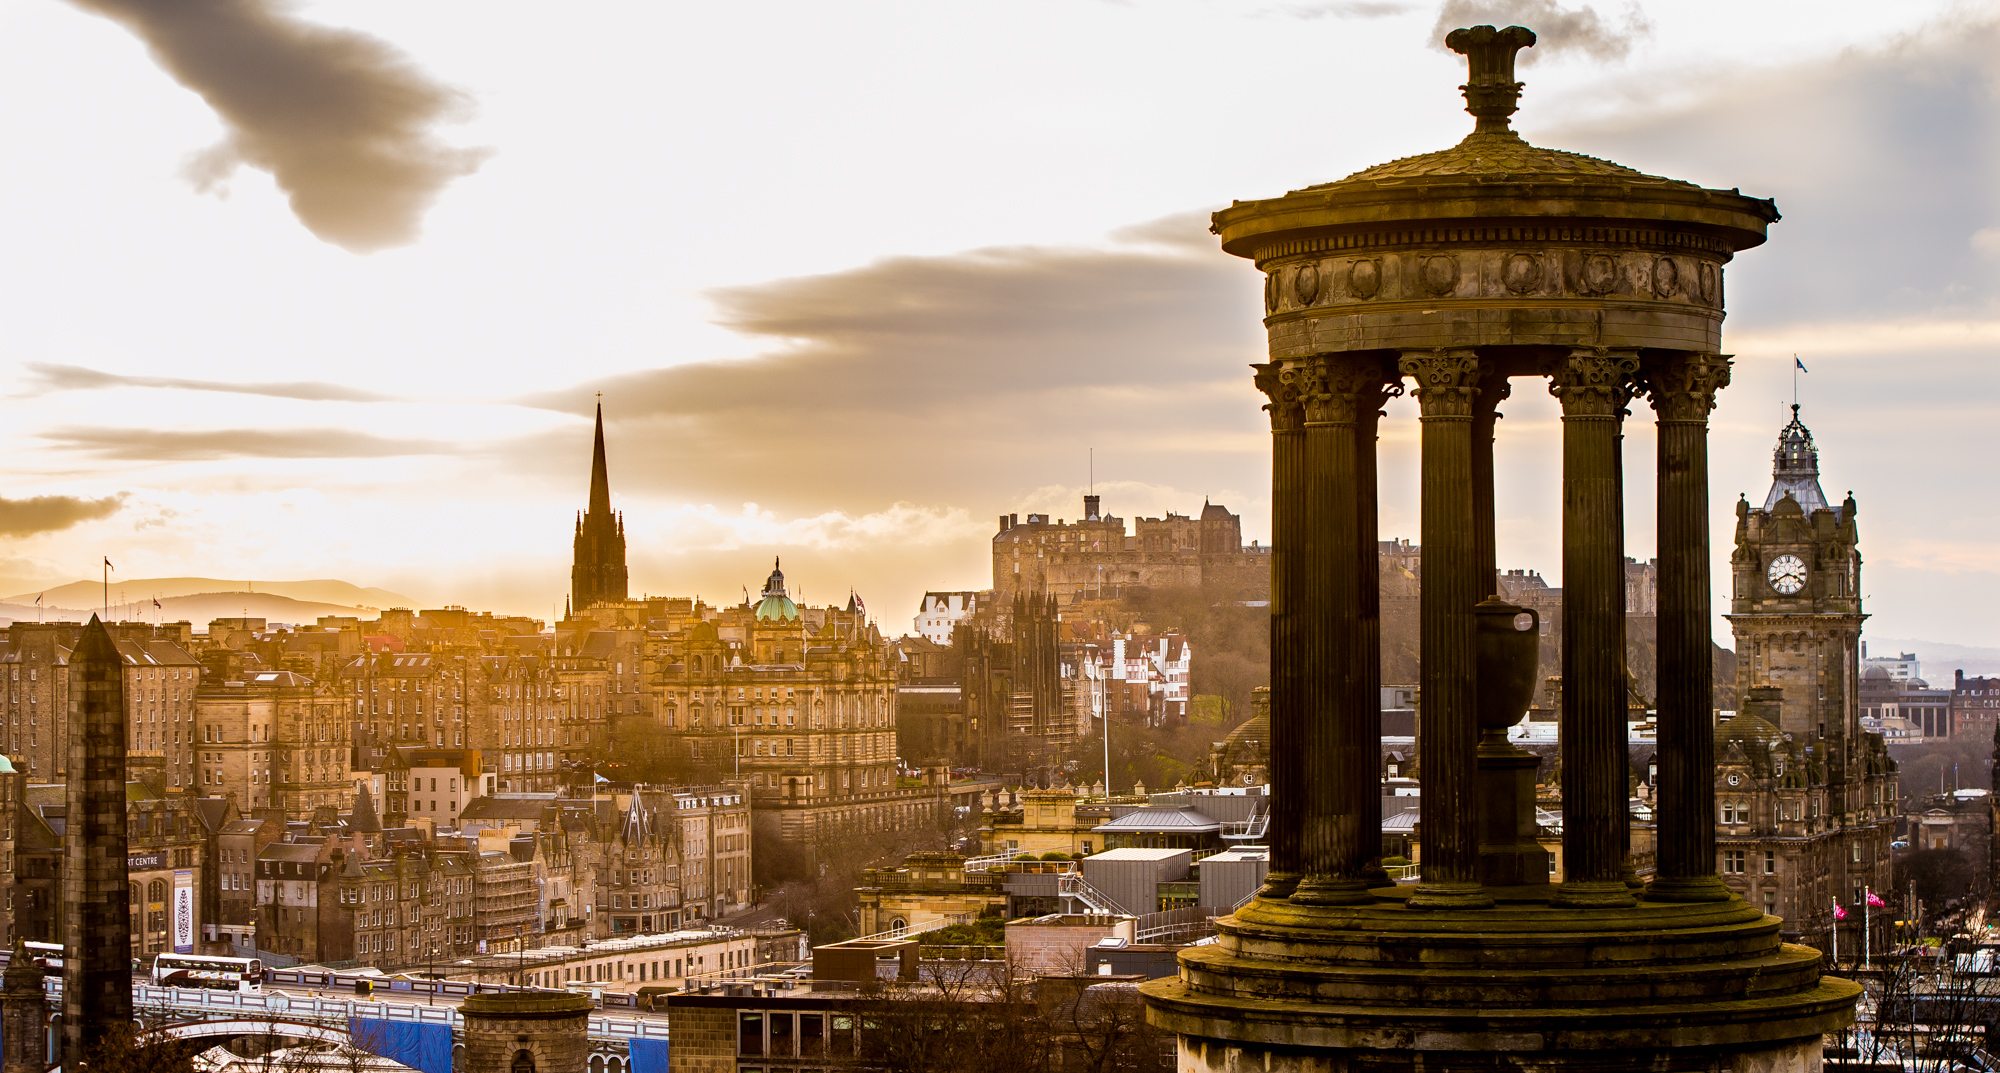 Five things people are saying about Edinburgh right now